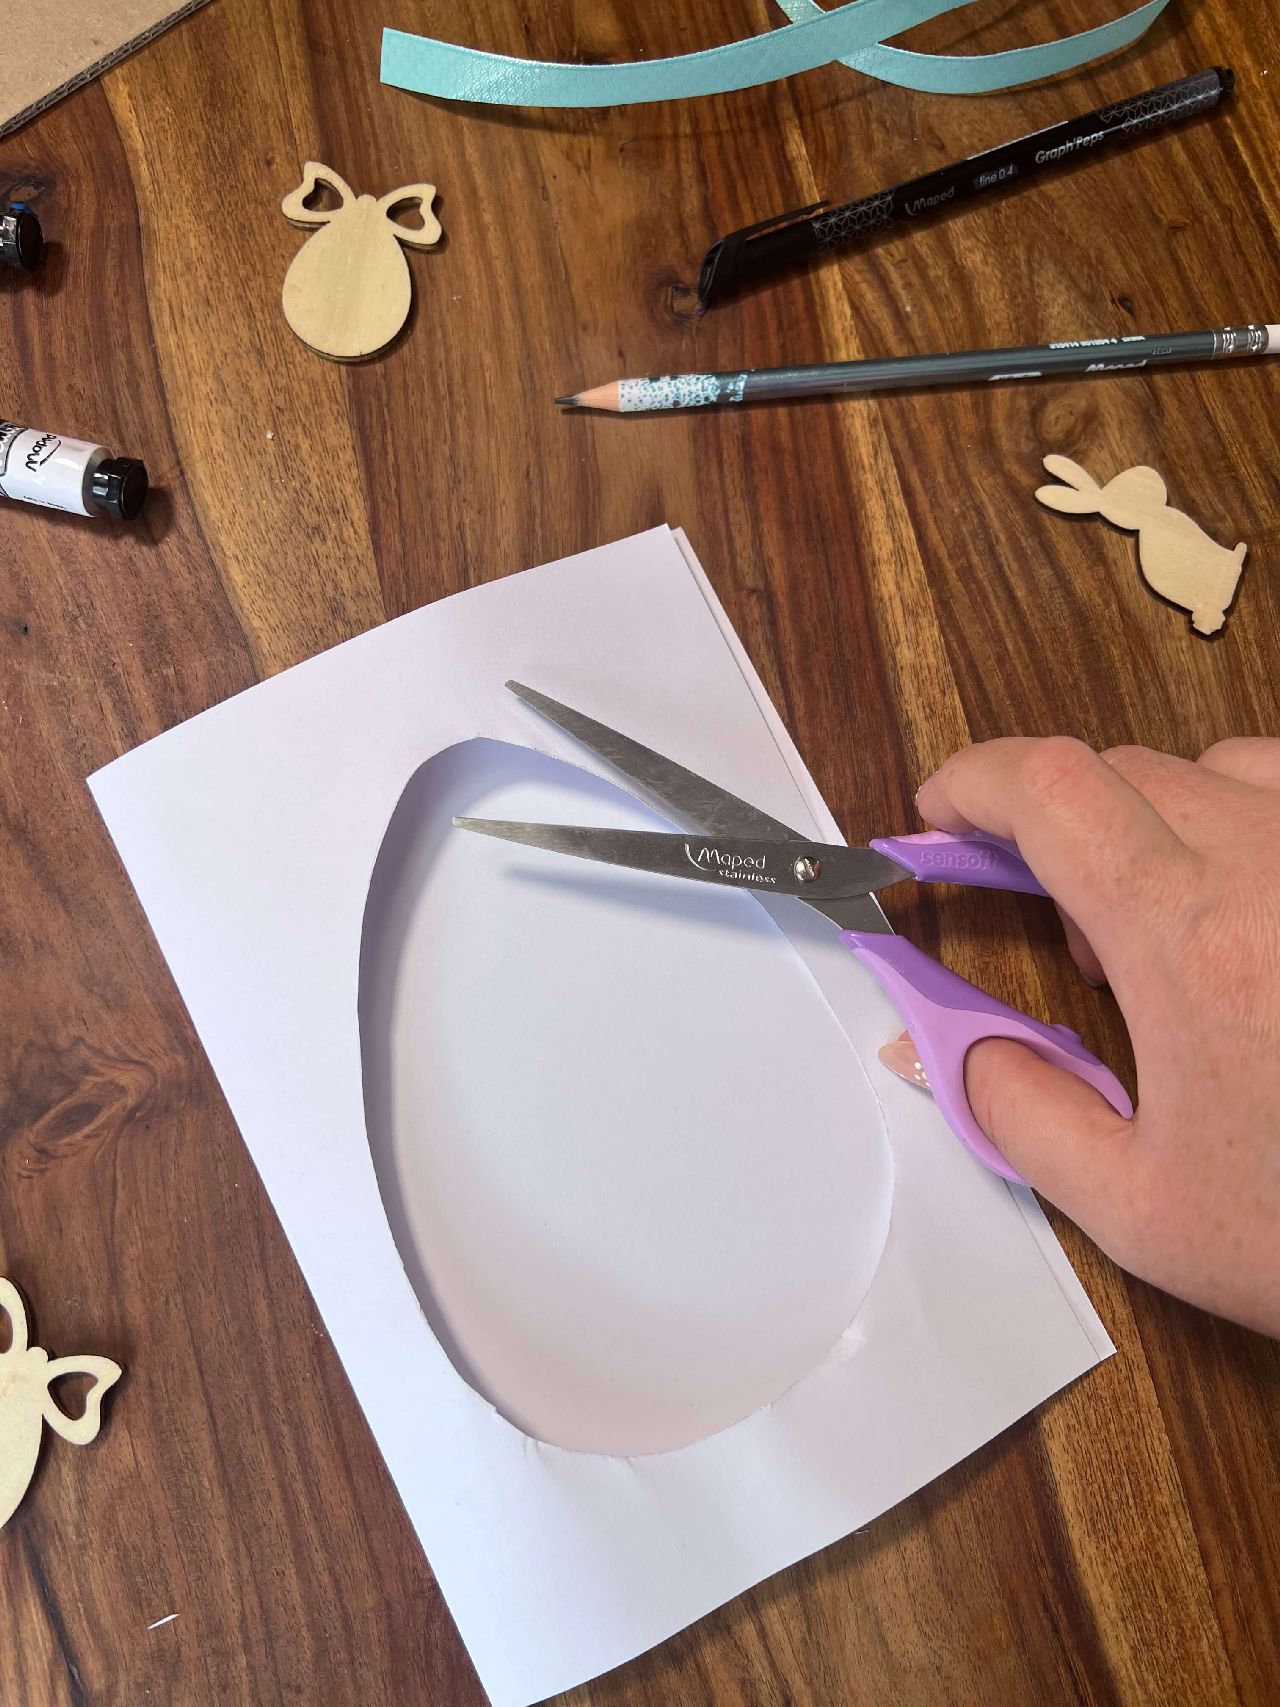 Cutting out the egg shape using scissors